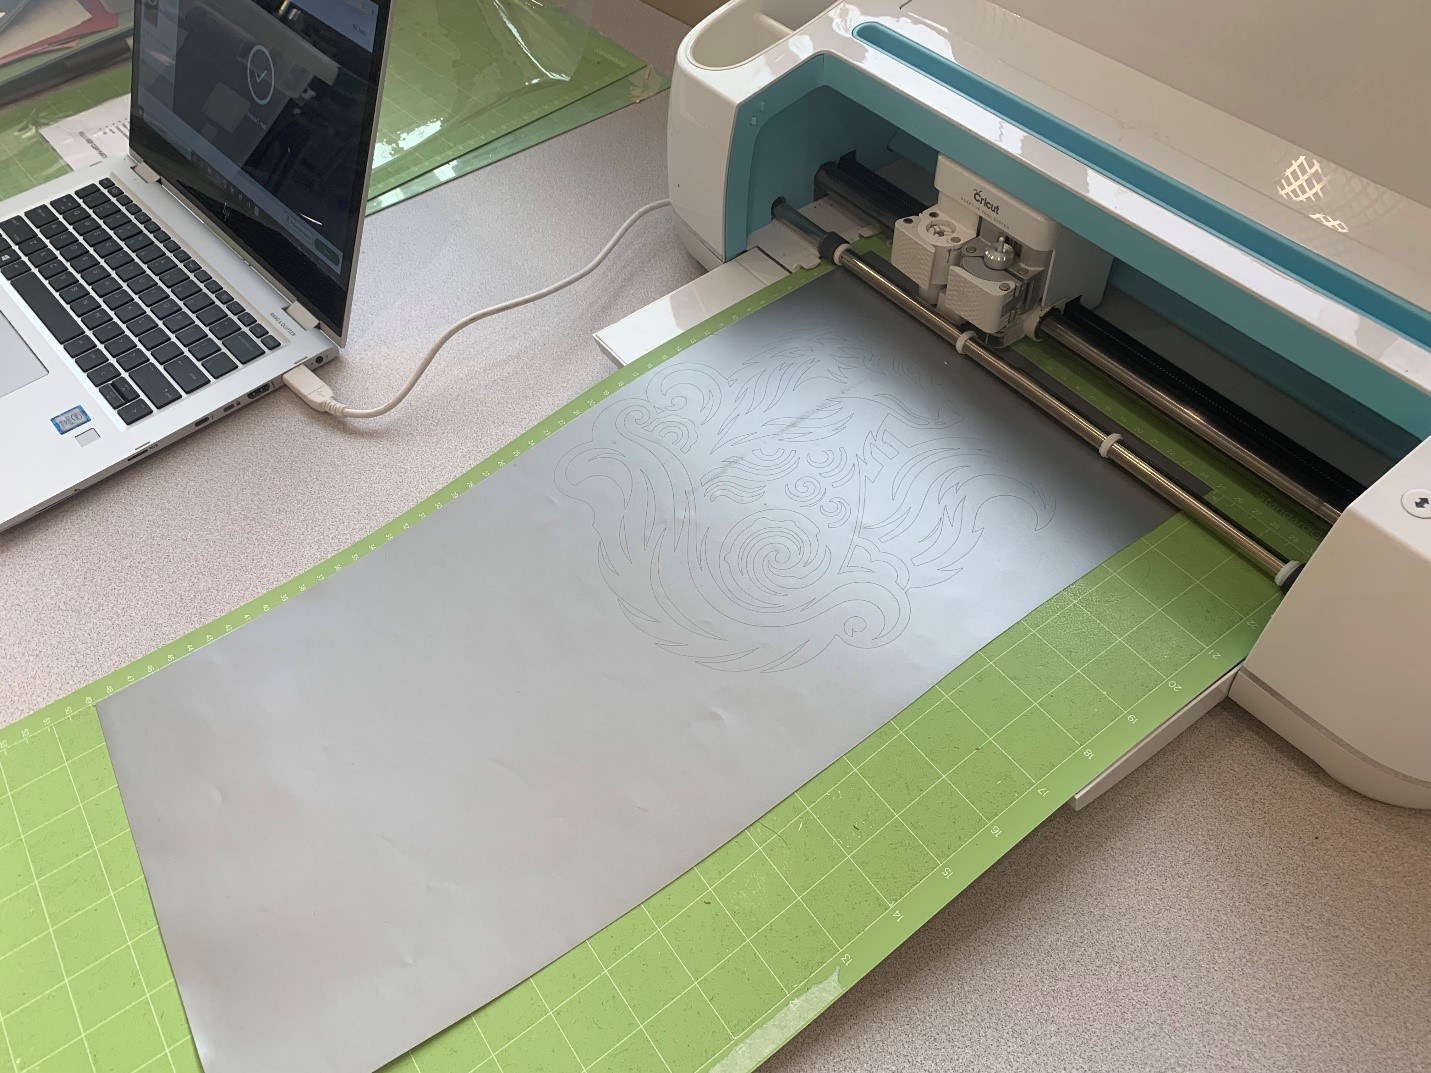 Silver vinyl loaded on a mat and fed into the Cricut Maker as it cuts the wolf design.